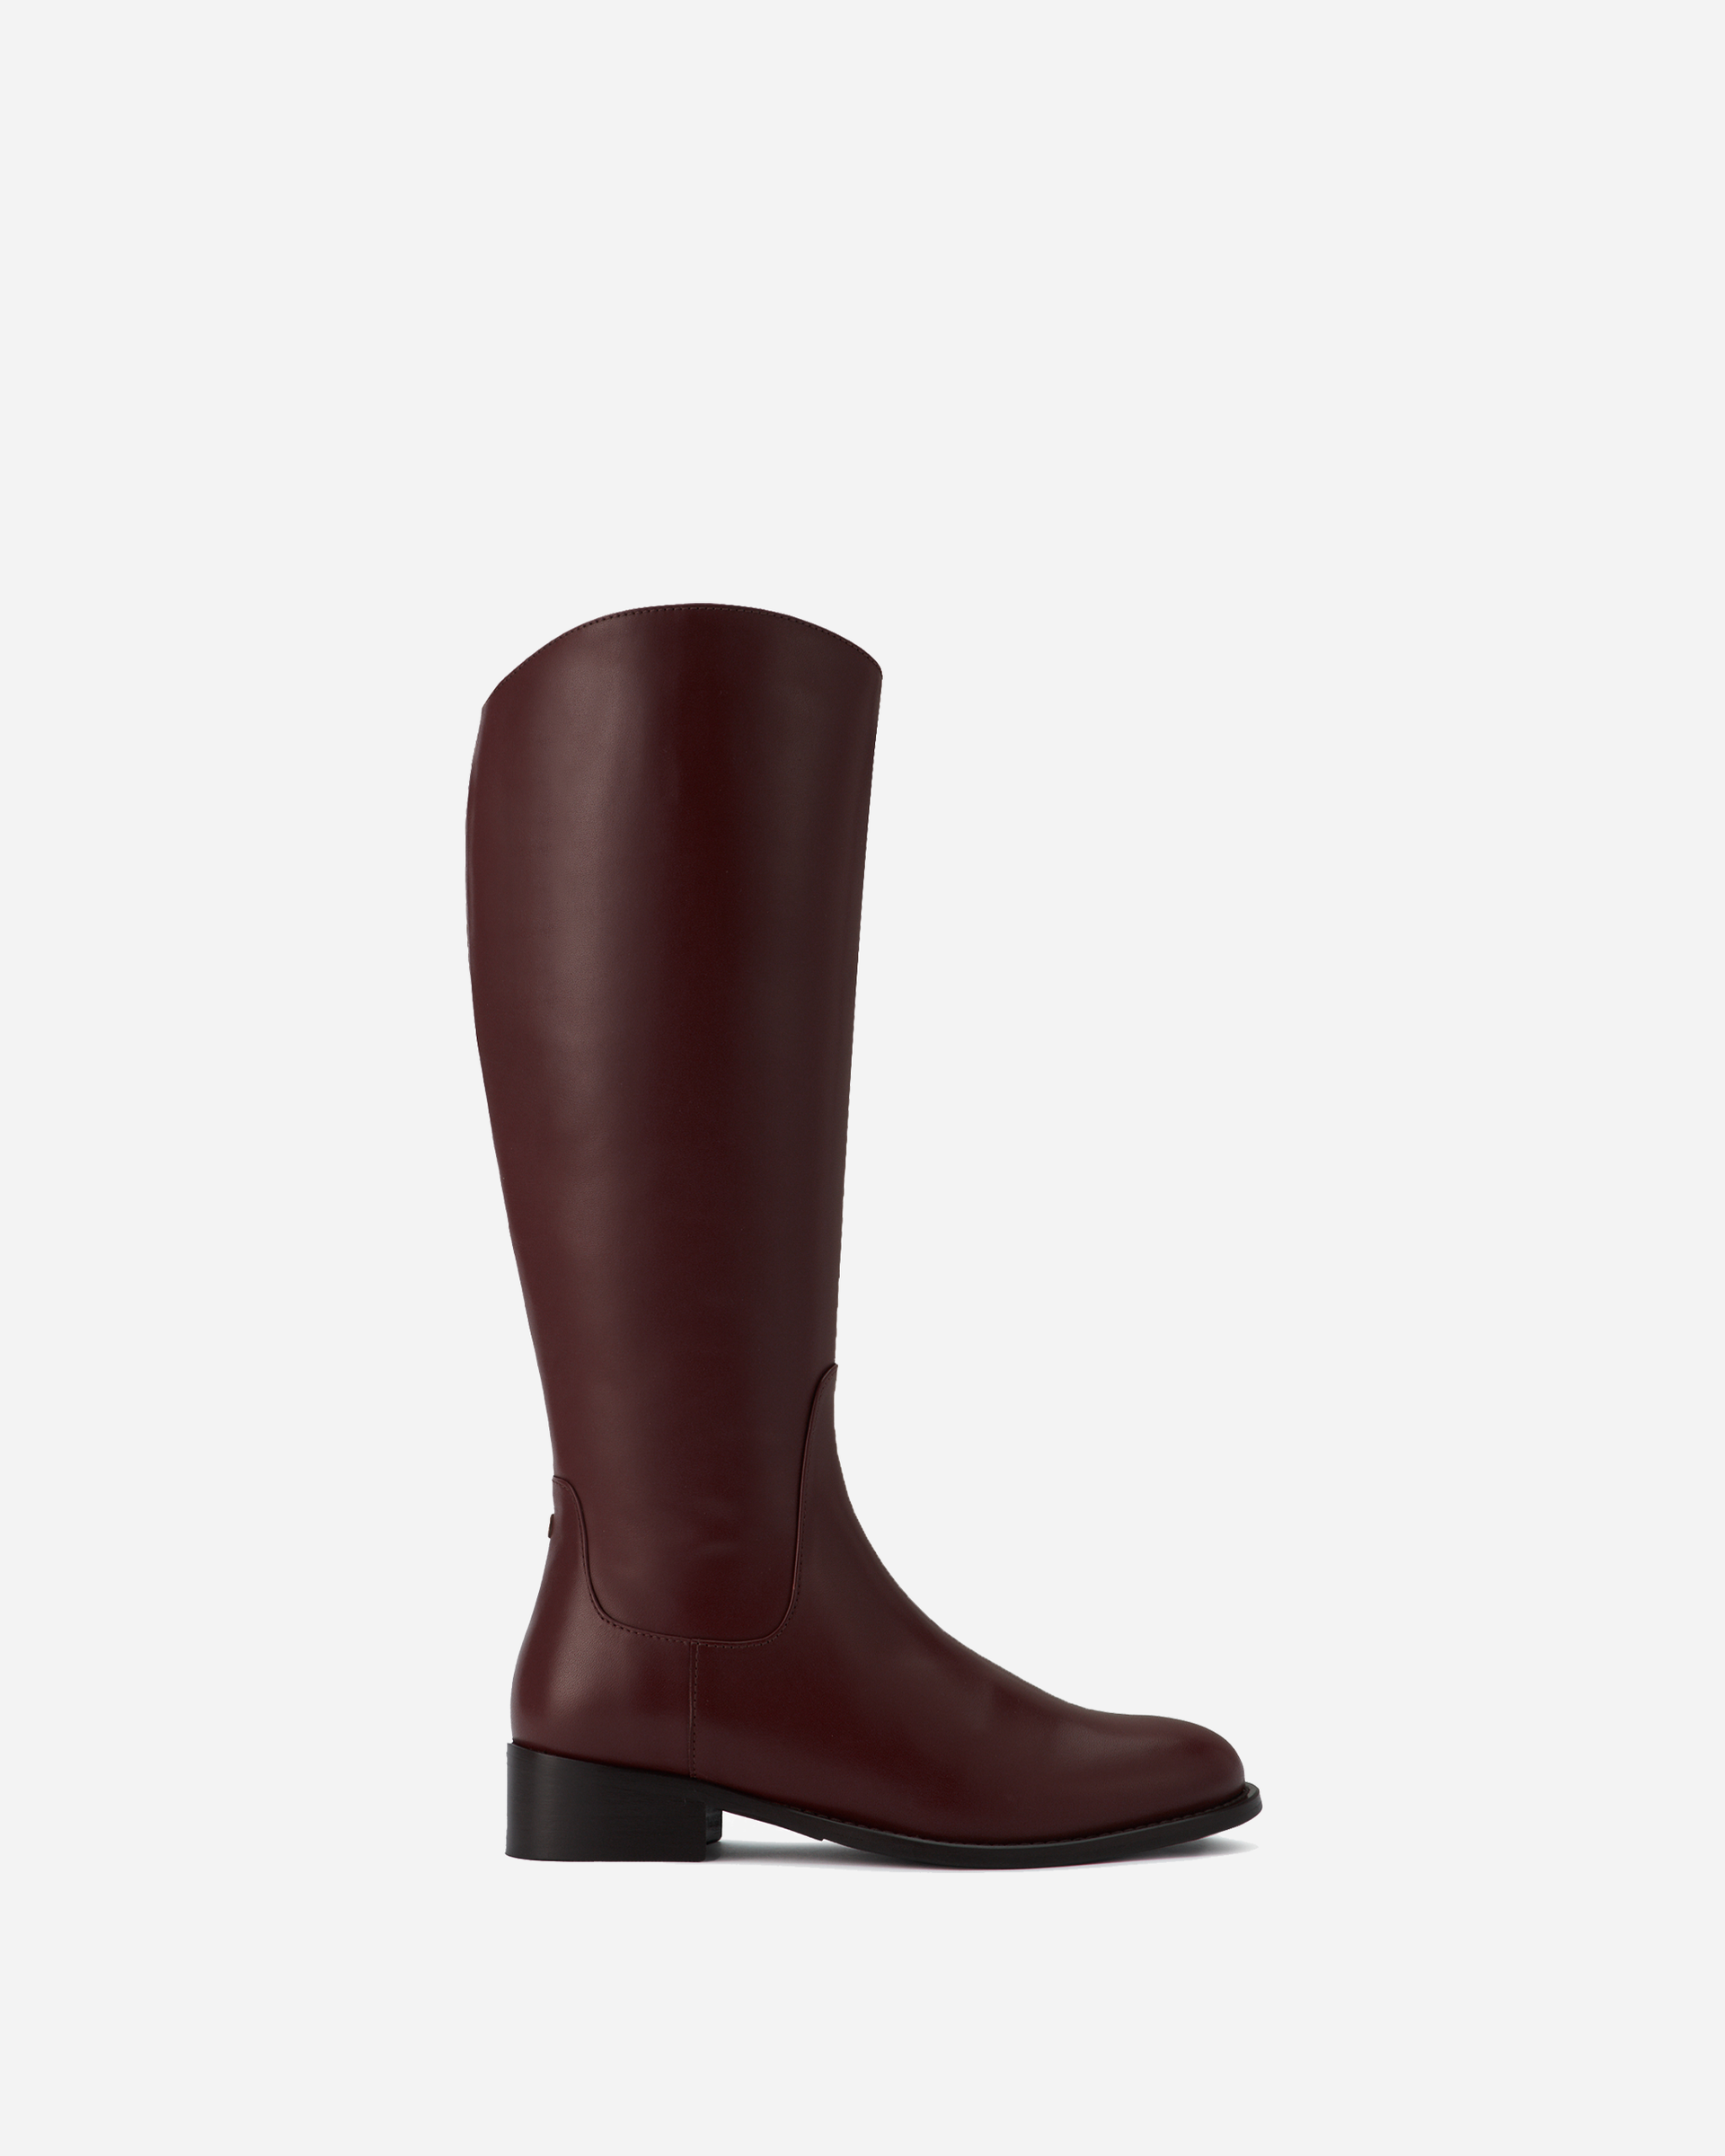 Wide calf boots to shop now